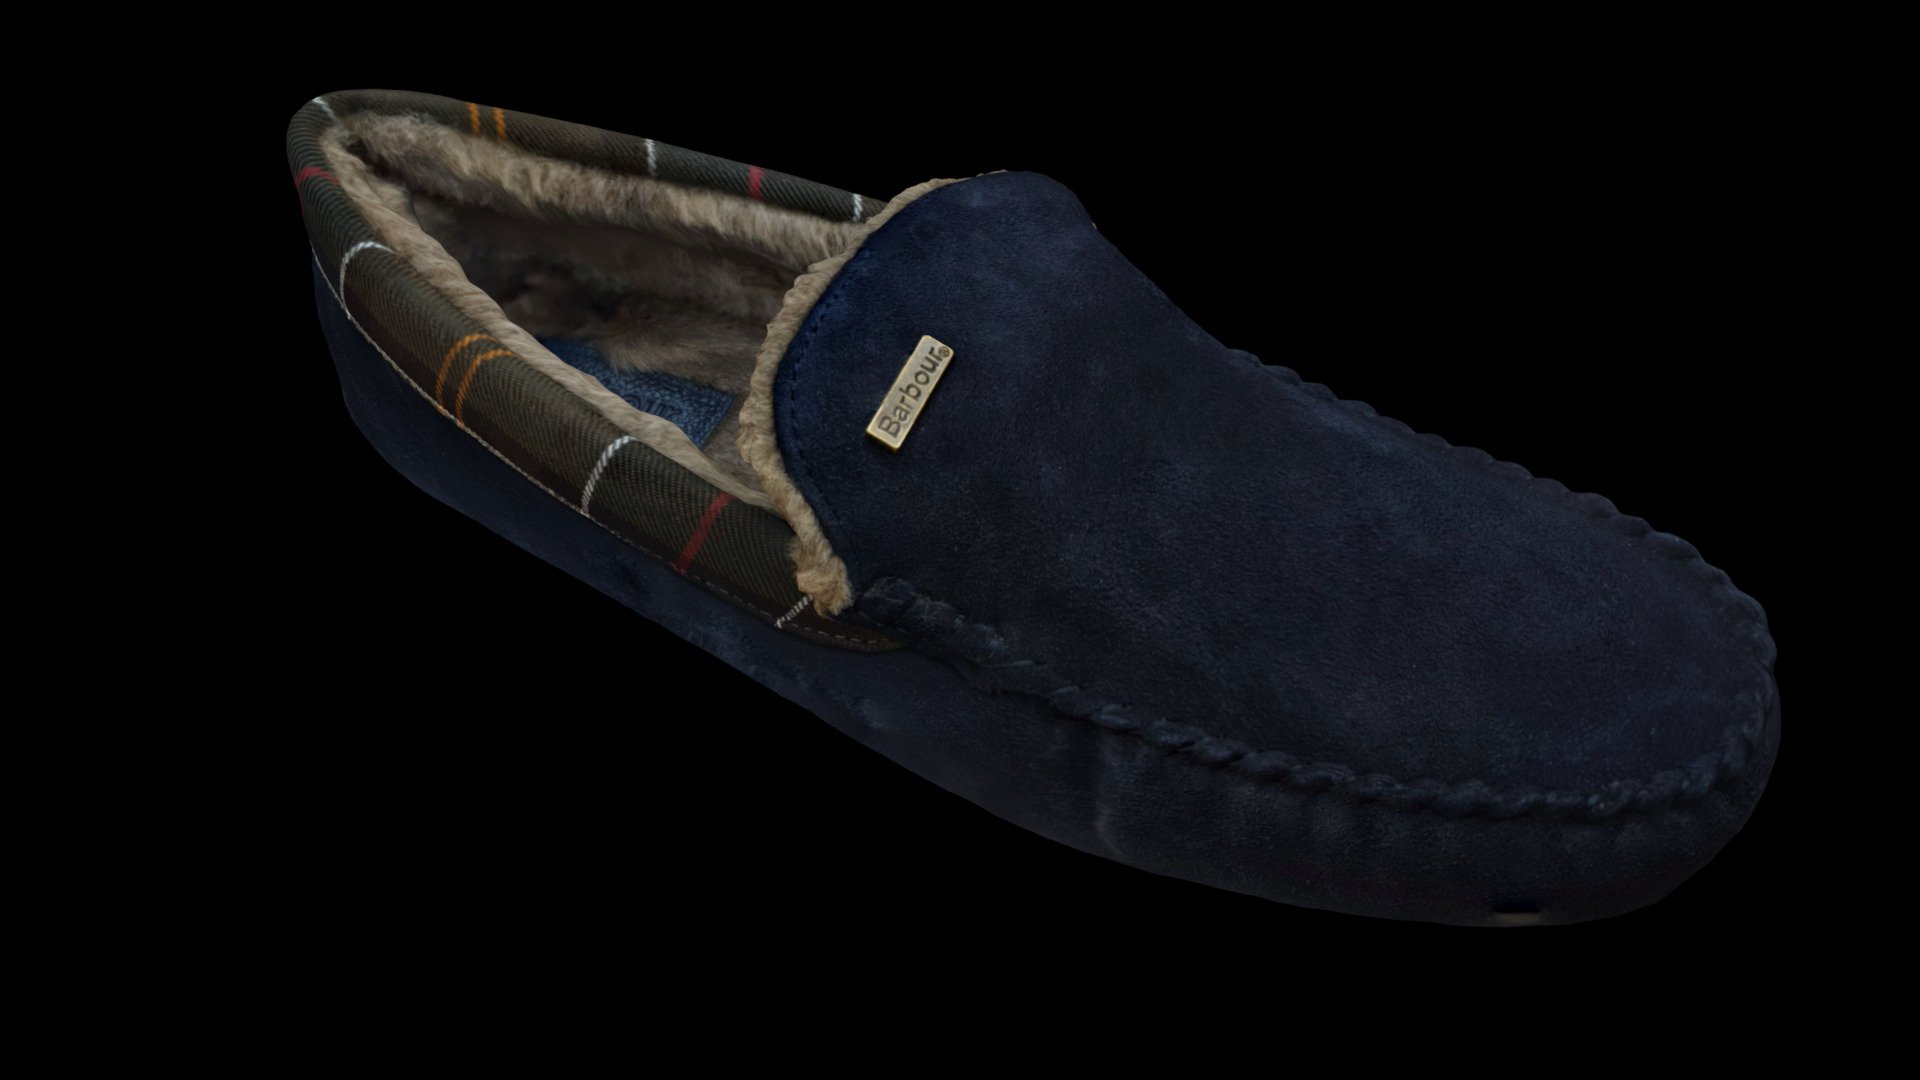 Barbour Monty blue suede slipper shoes scan. size 11

RAW scan (162 pictures). GLB Format only.

Please have a look on all my other 3D scans, LIKE and FOLLOW me to encourage me to make more scans :) - Barbour Monty suede shoes scan - 3D model by vv37 3d model